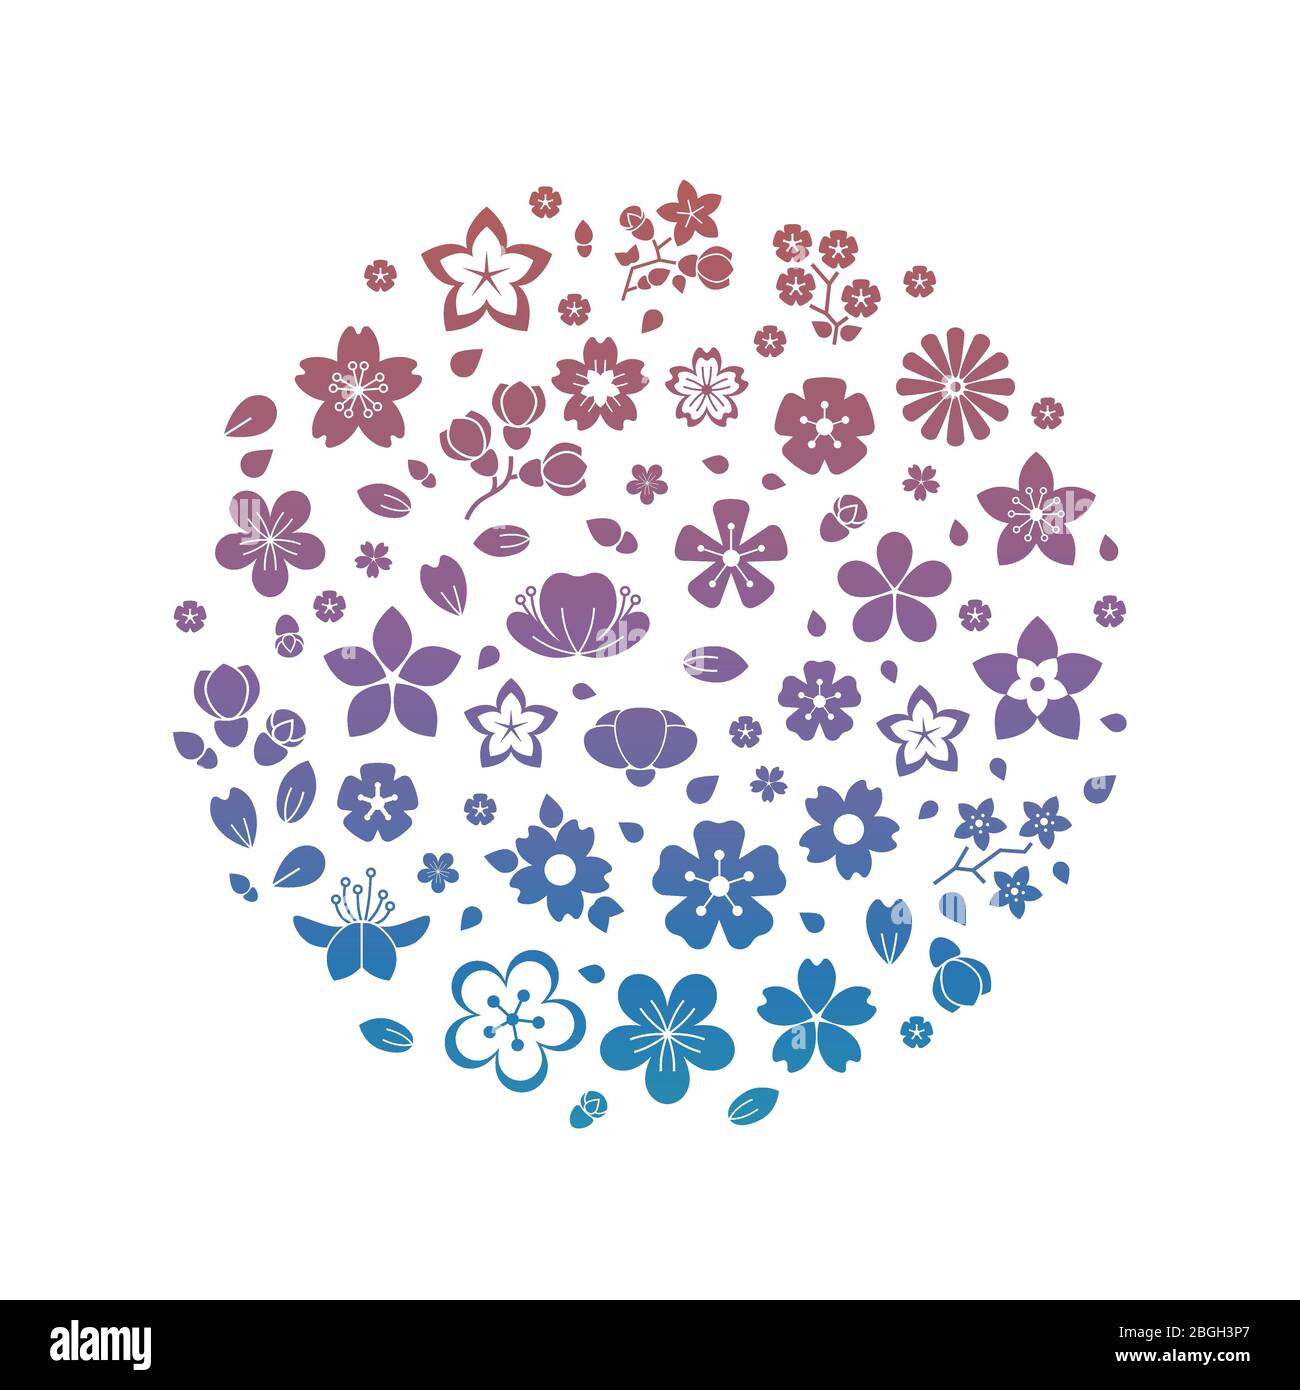 Colorful logo blossom flowers silhouettes isolated on white background. Vector illustration Stock Vector